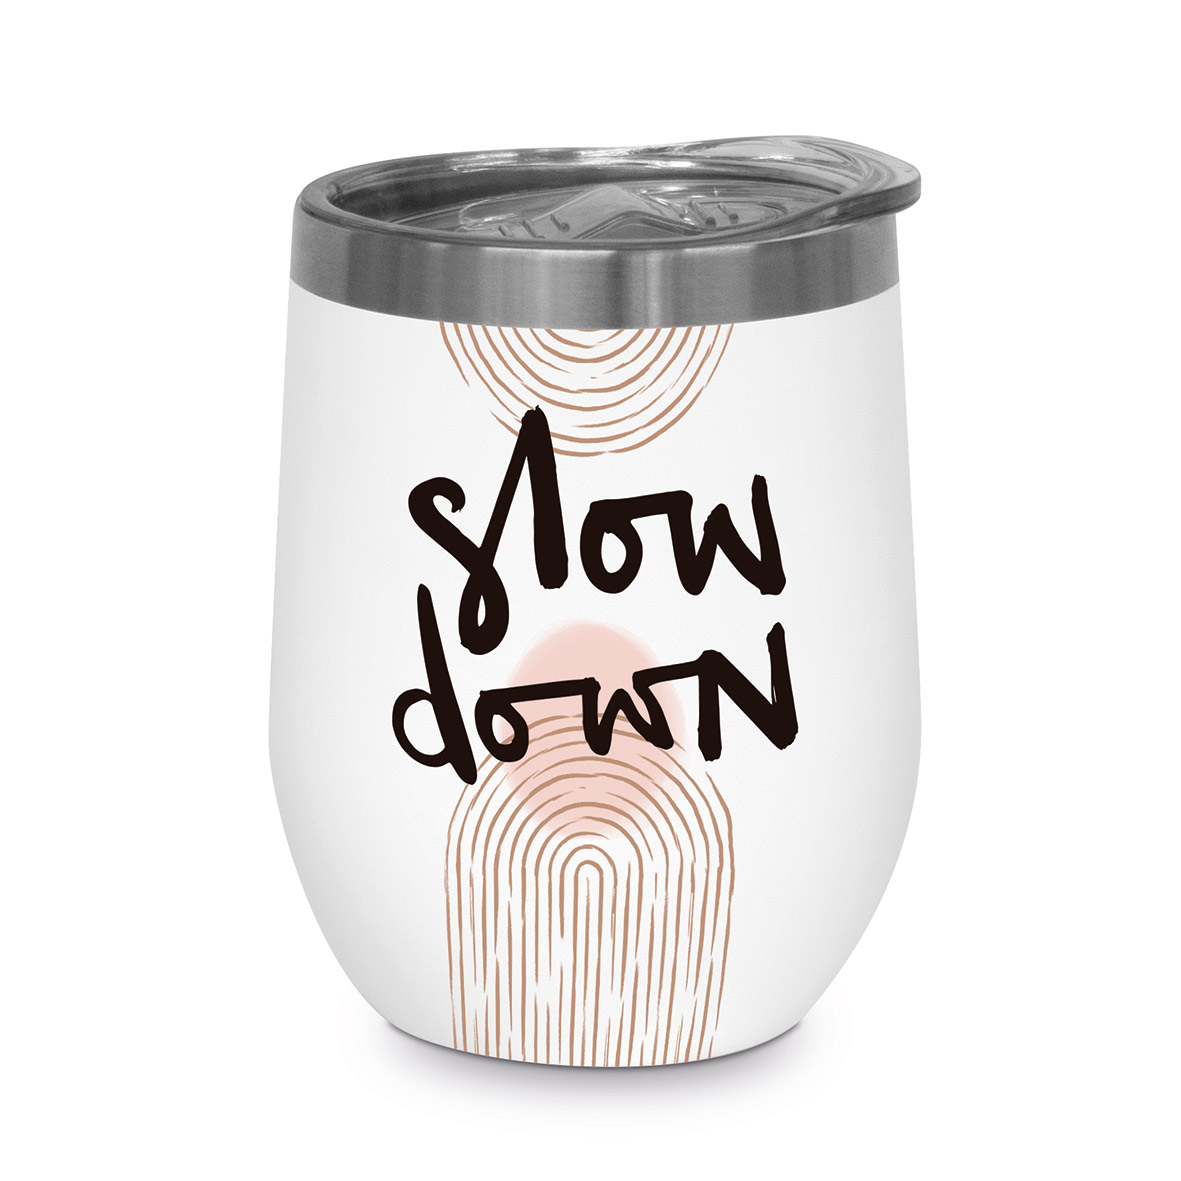 Cana de voiaj - Thermo - Slow Down | Paperproducts Design